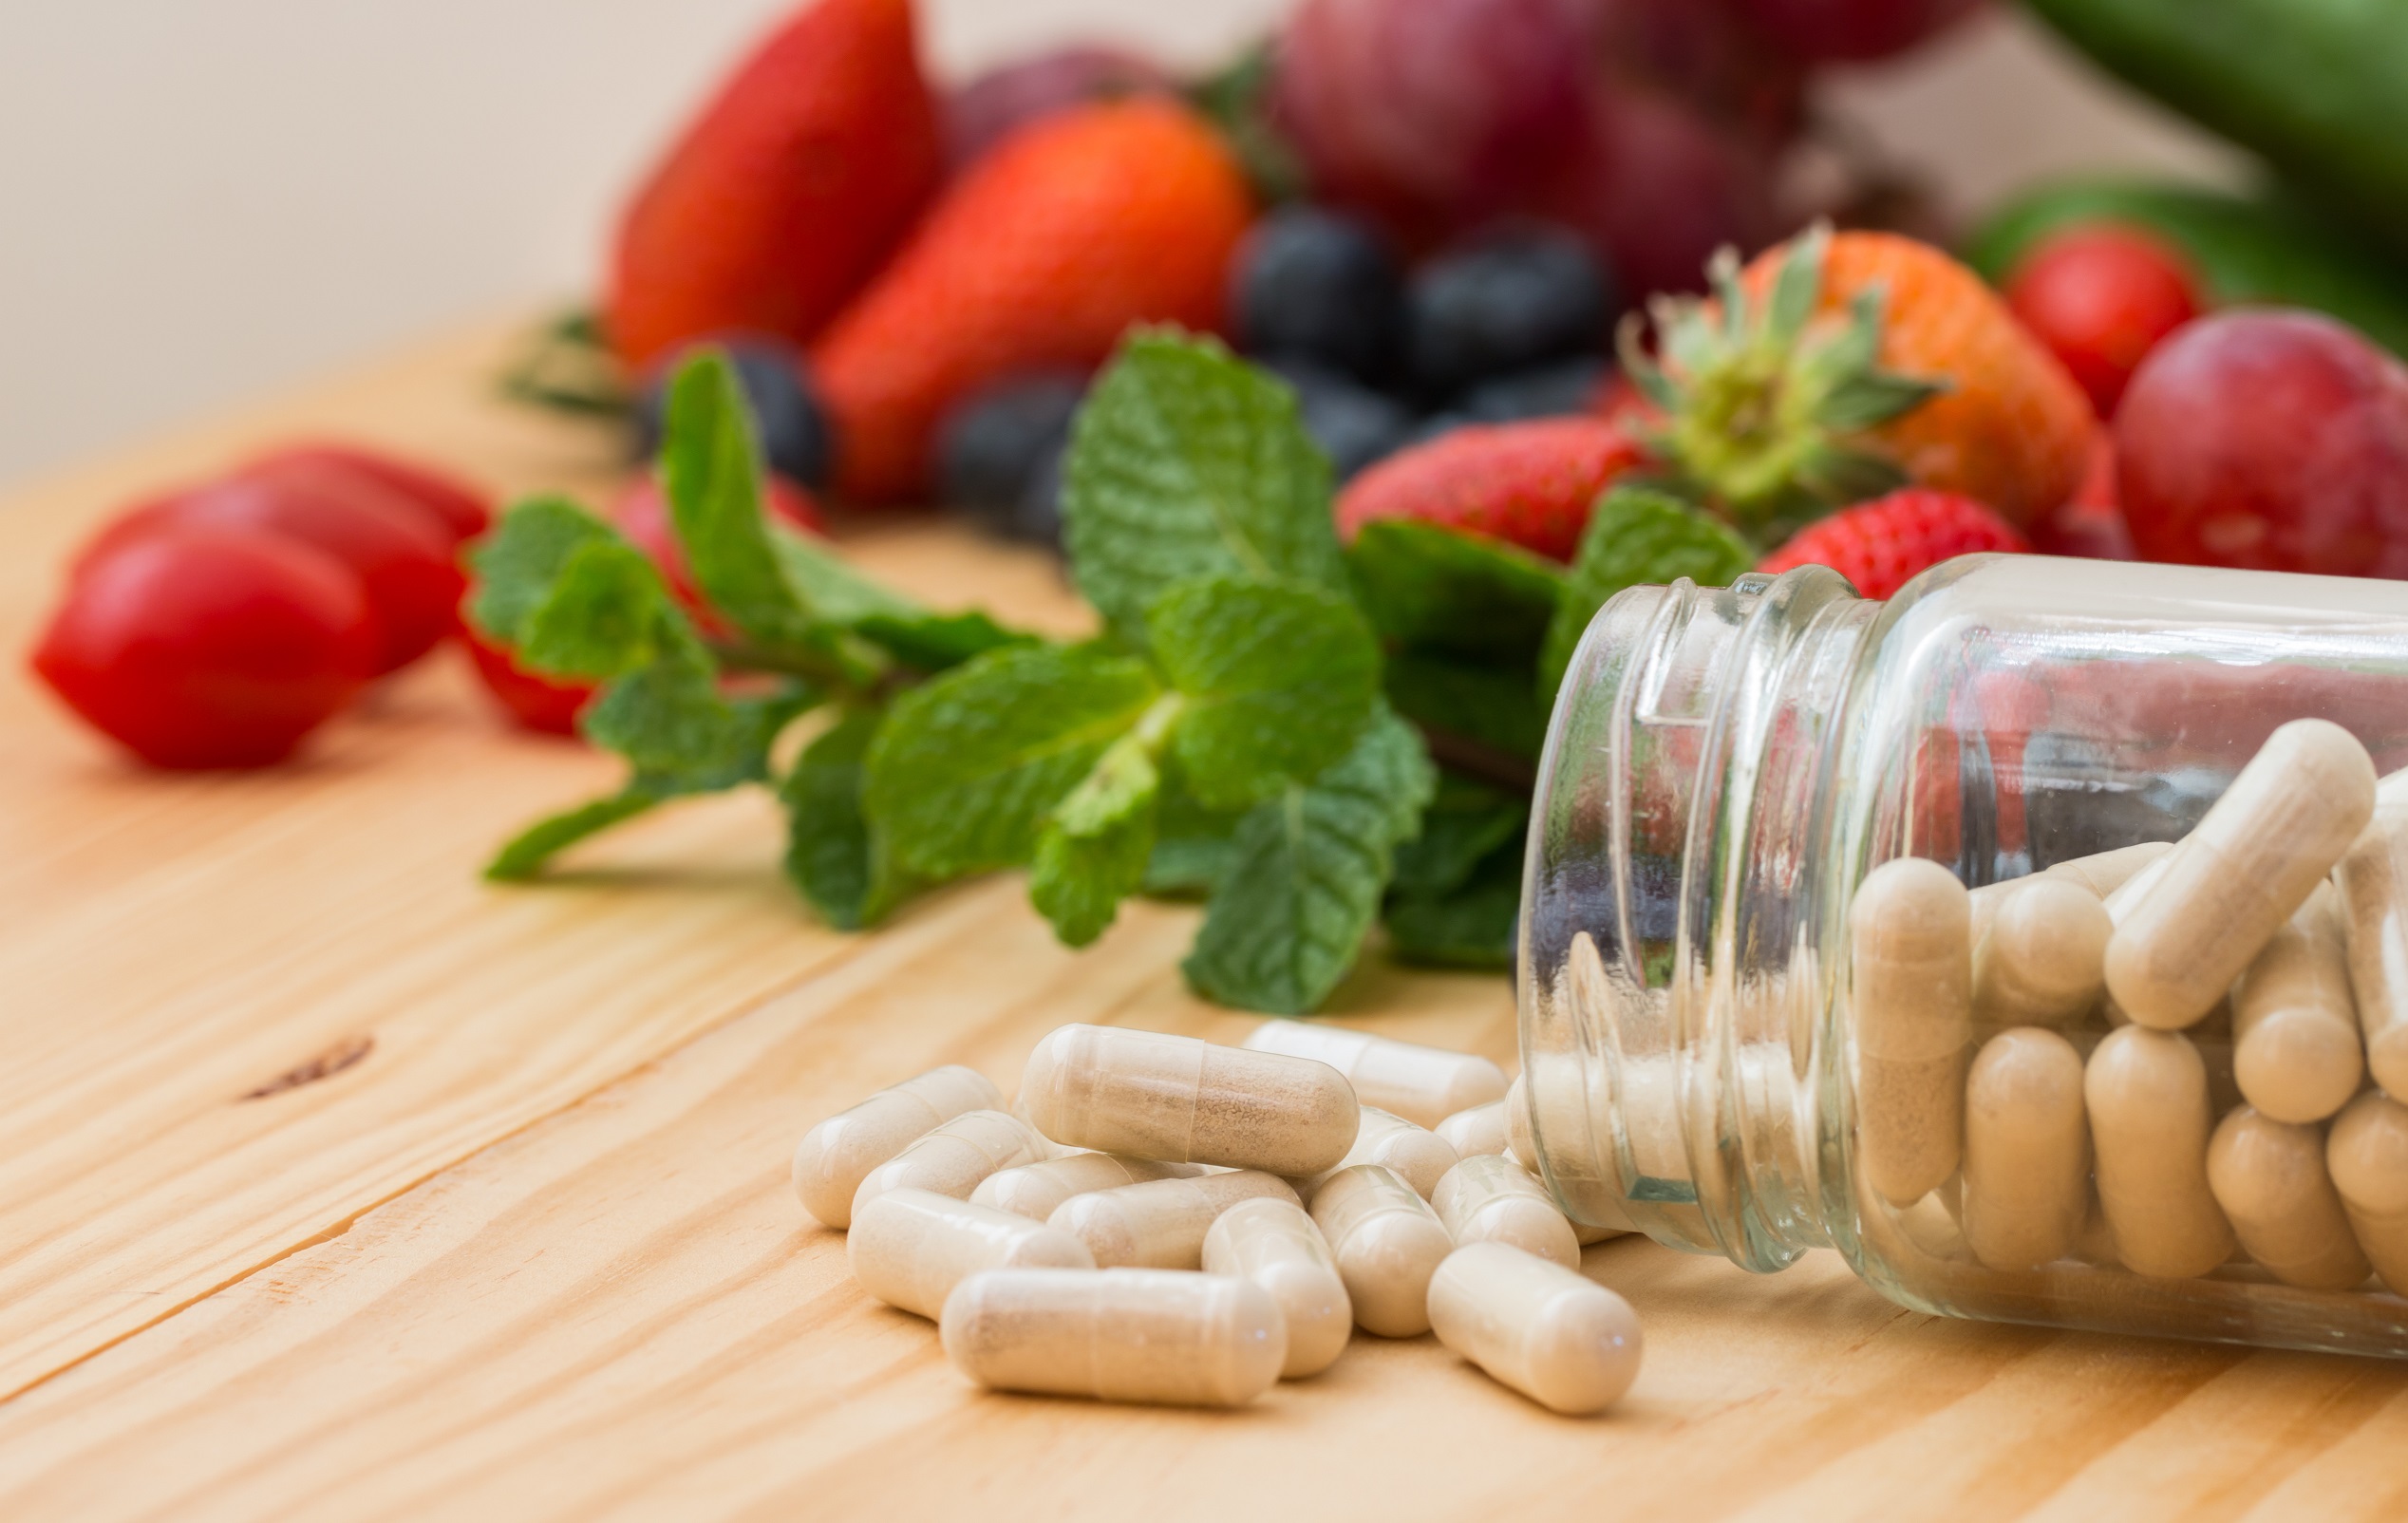 supplements to prevent dementia. vitamins to prevent Alzheimer's, vitamins to prevent dementia